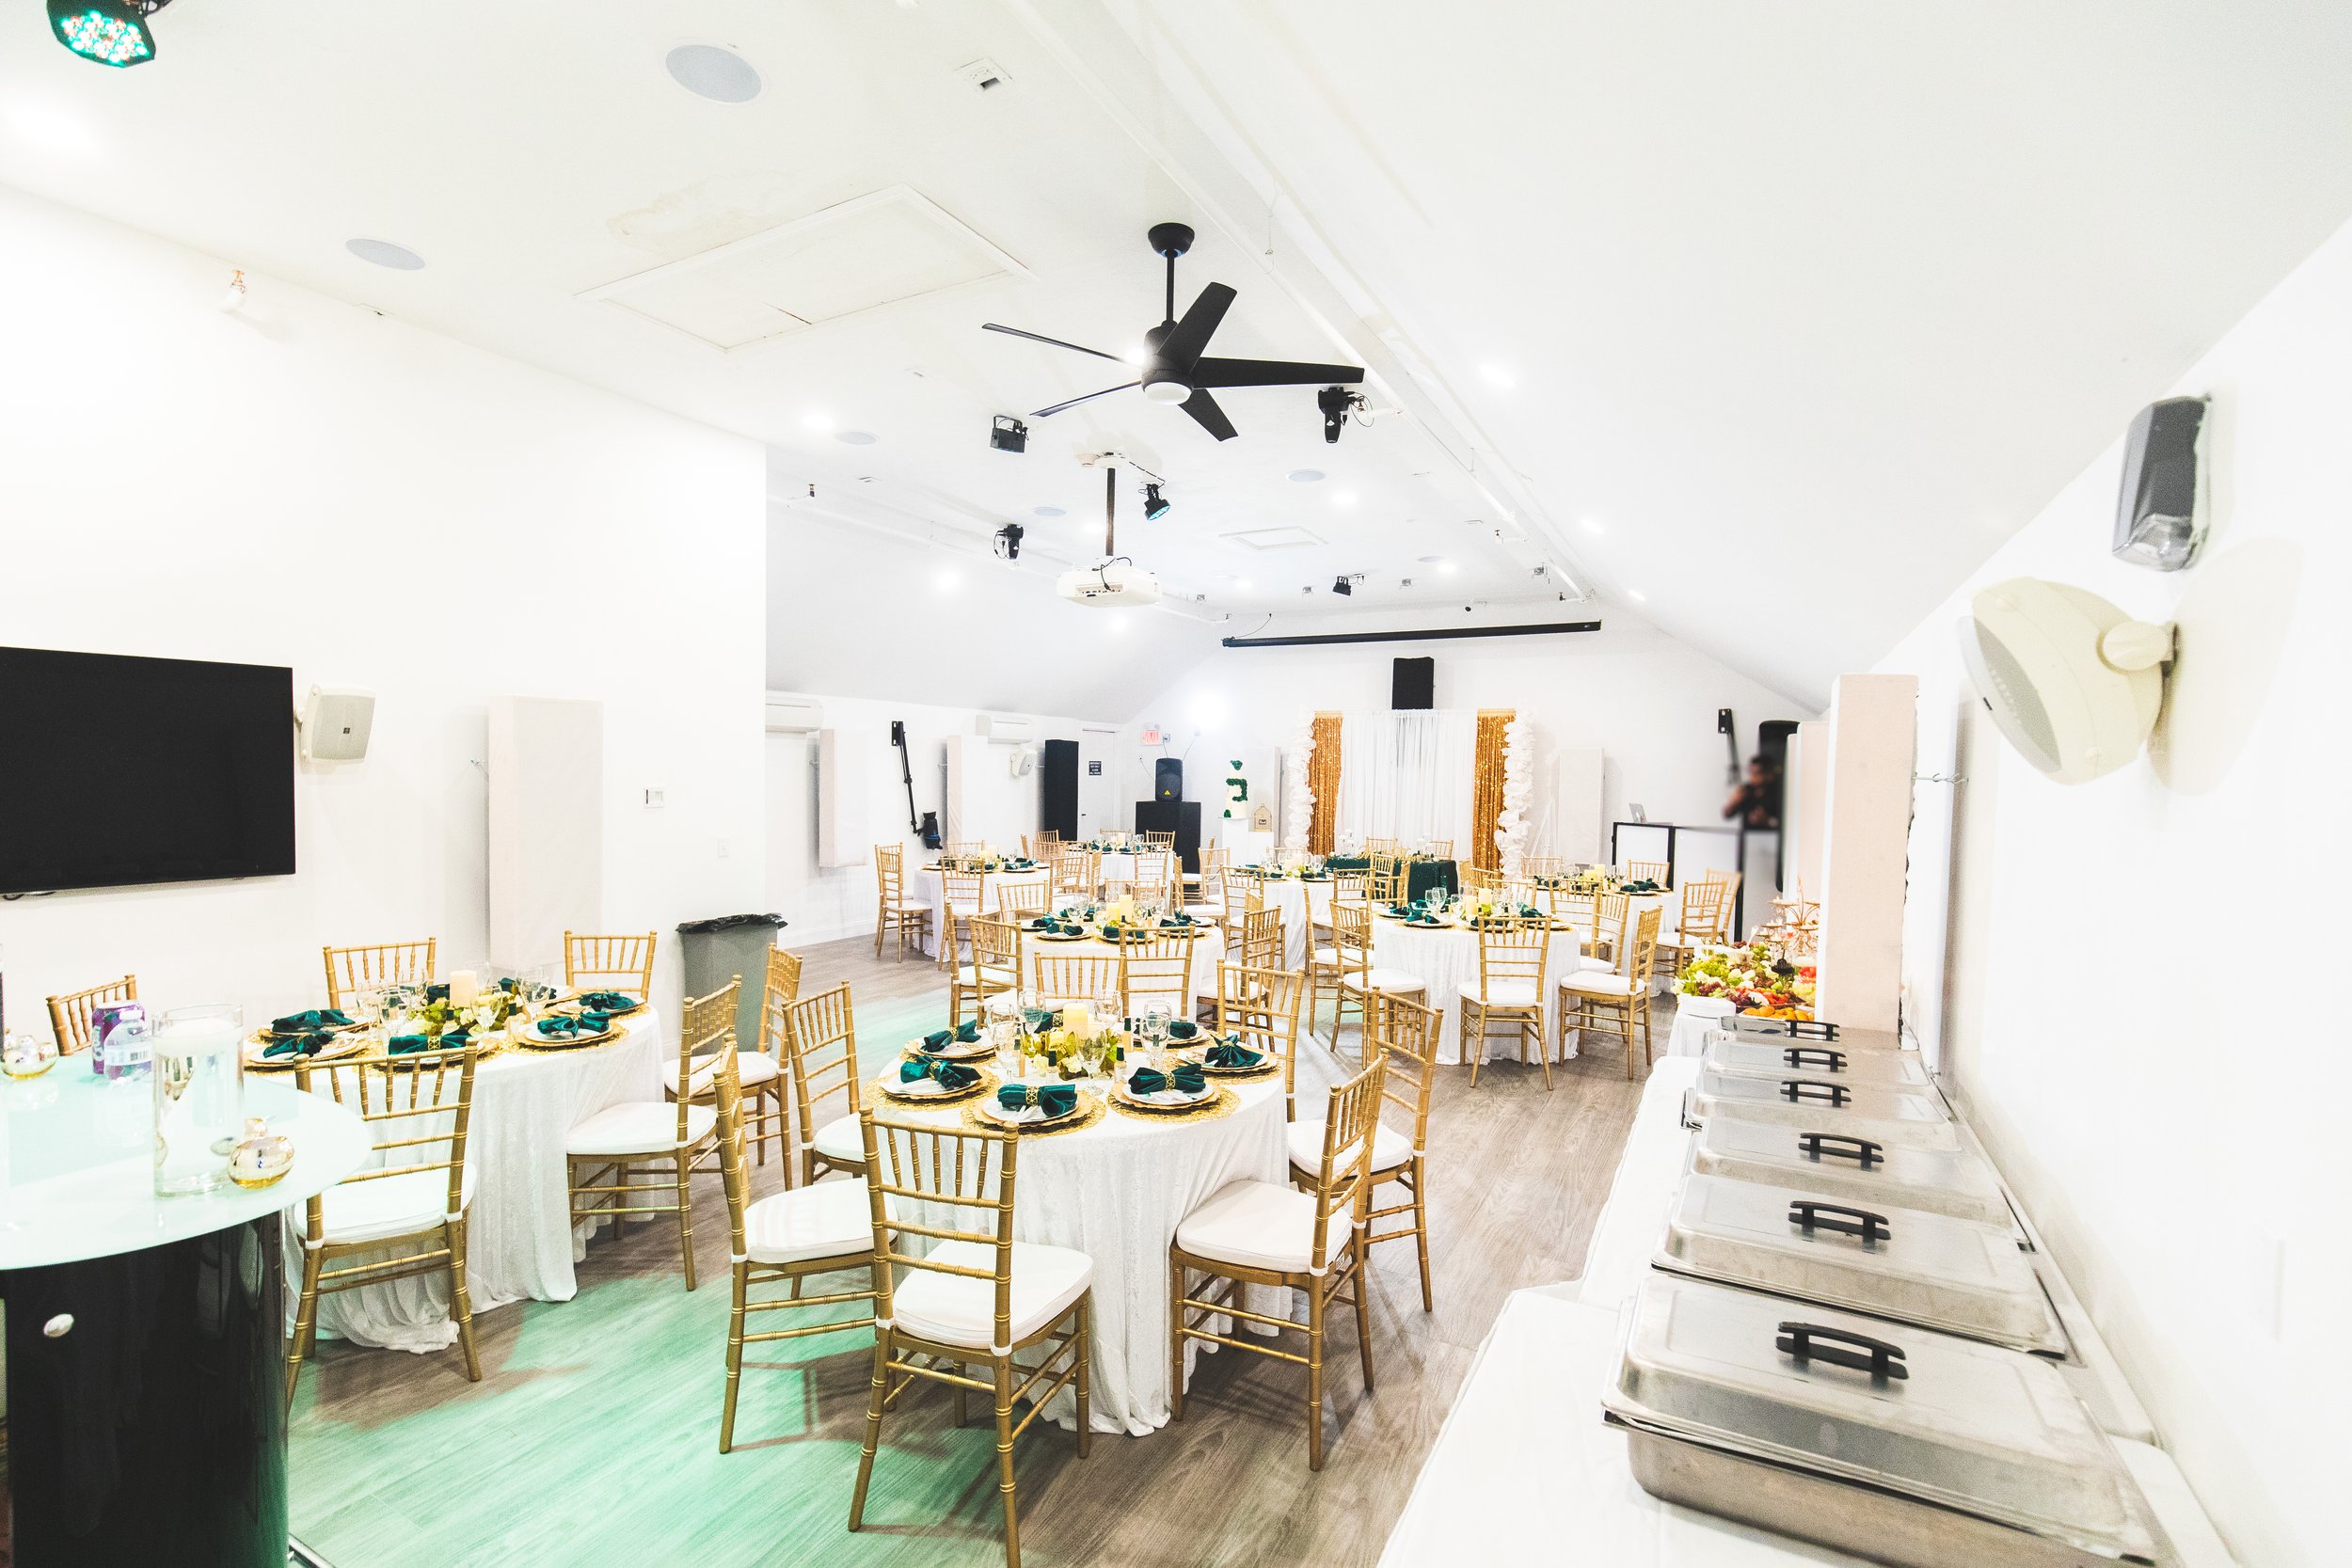 076A6615+Boston Studio Rental+Party+Venue+Function+Event+Hall+for+Rent+Stoughton+MA.jpg